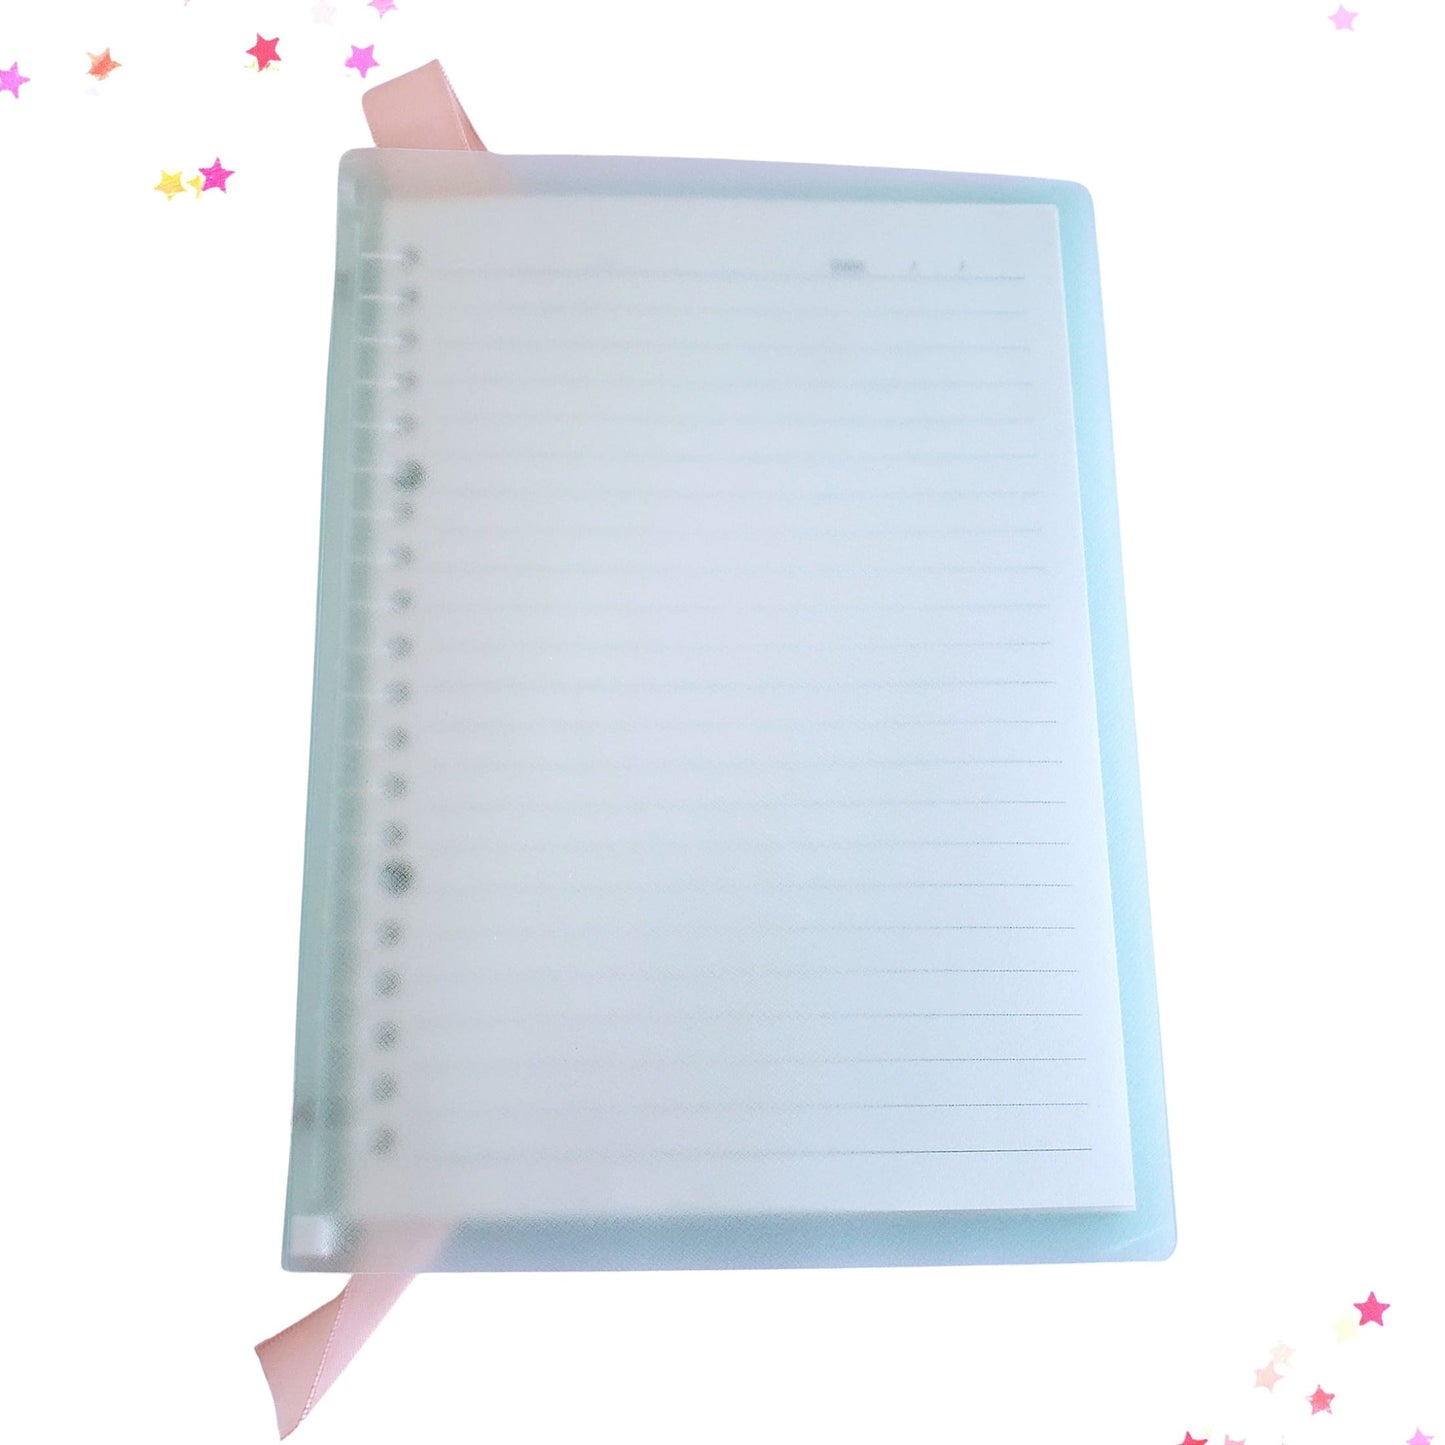 Notebook with Translucent Cover from Confetti Kitty, Only 7.99